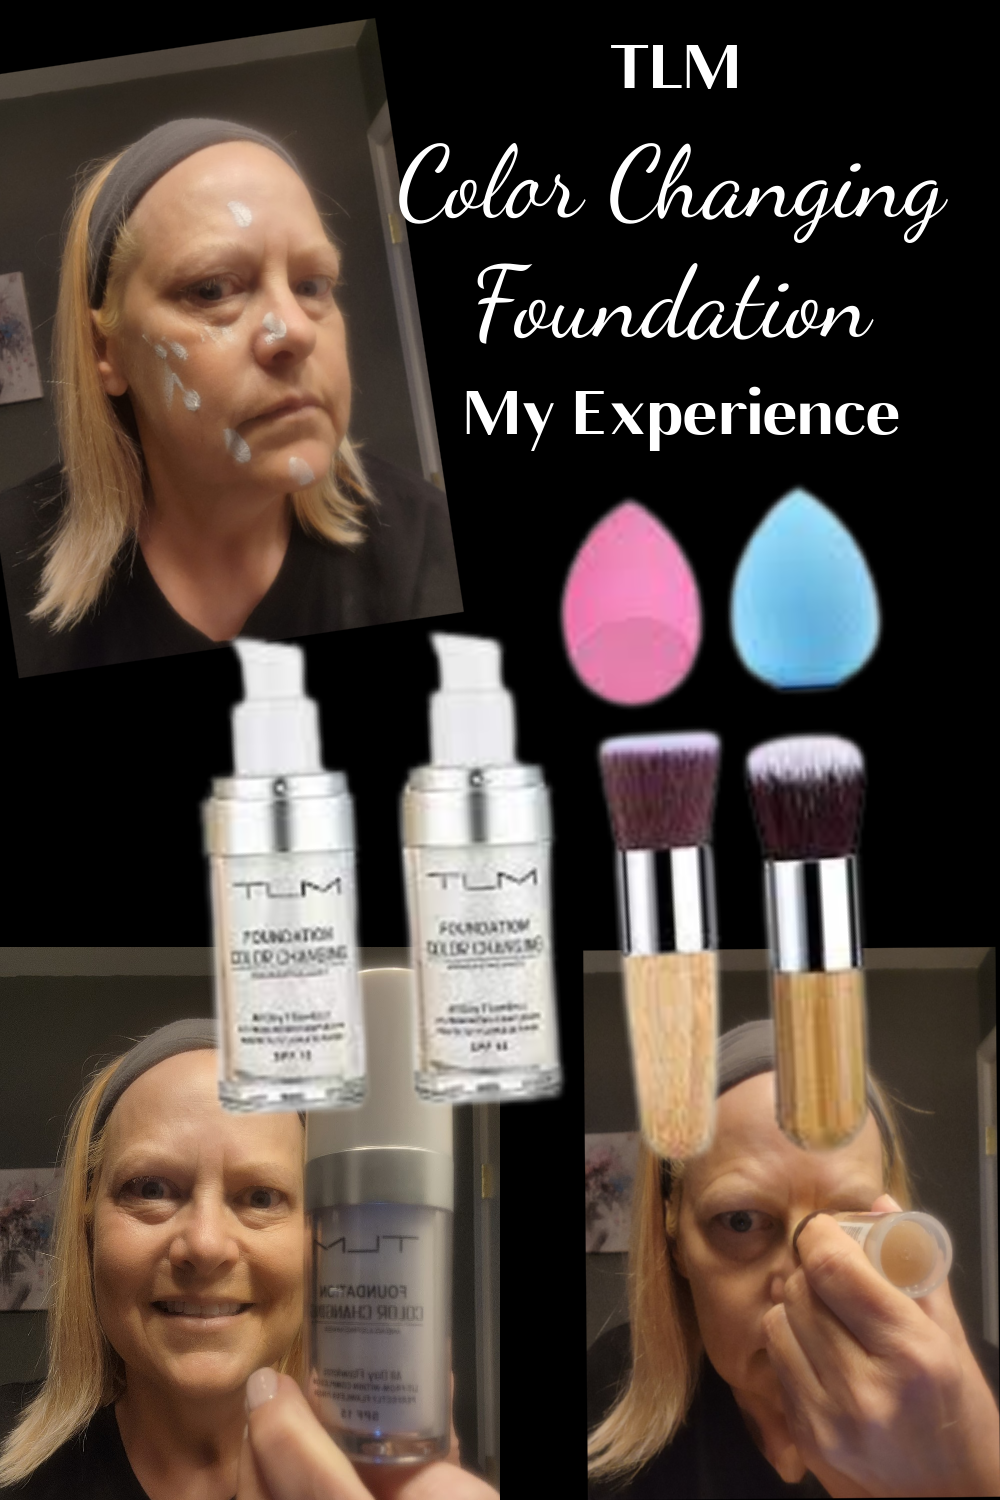 TLM Color Changing Foundation: My Experience